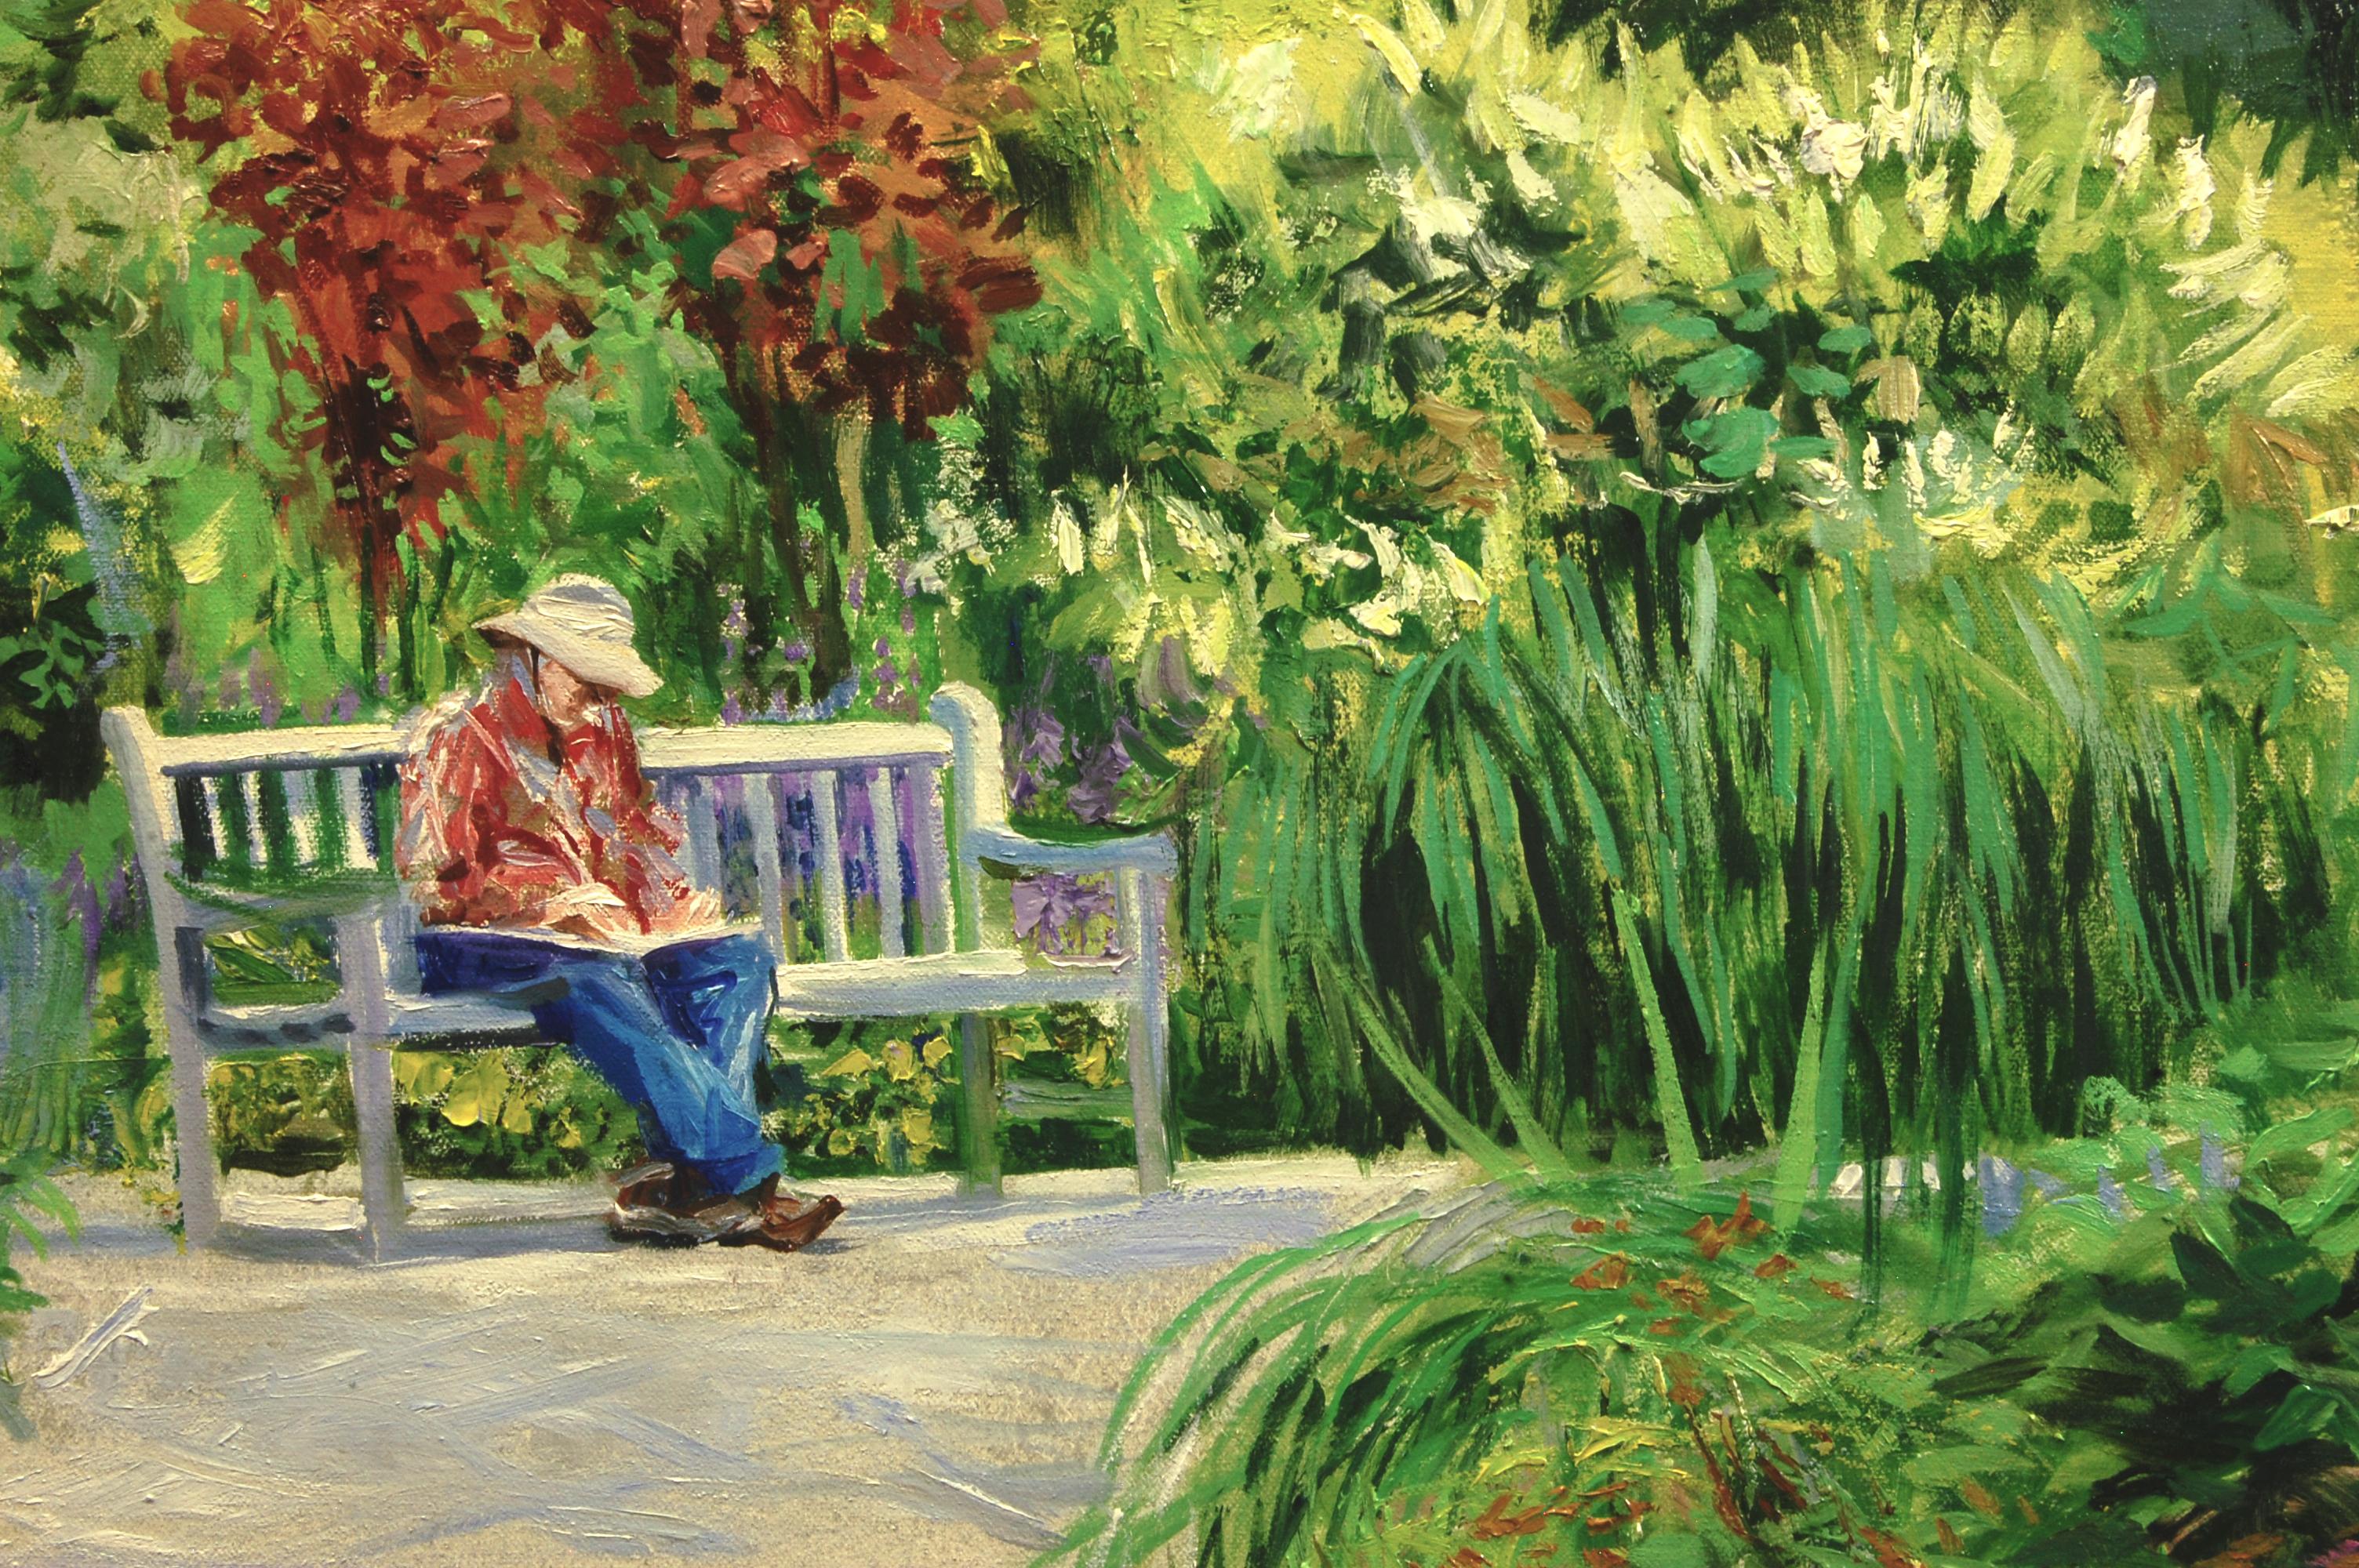 <p>Artist Comments<br>Inspired after a trip to The New York Botanical Gardens in the Bronx, artist Onelio Marrero shares a view of a person taking a break on a park bench. The idea of an artist including another artist appeals to Onelioâ€”one that